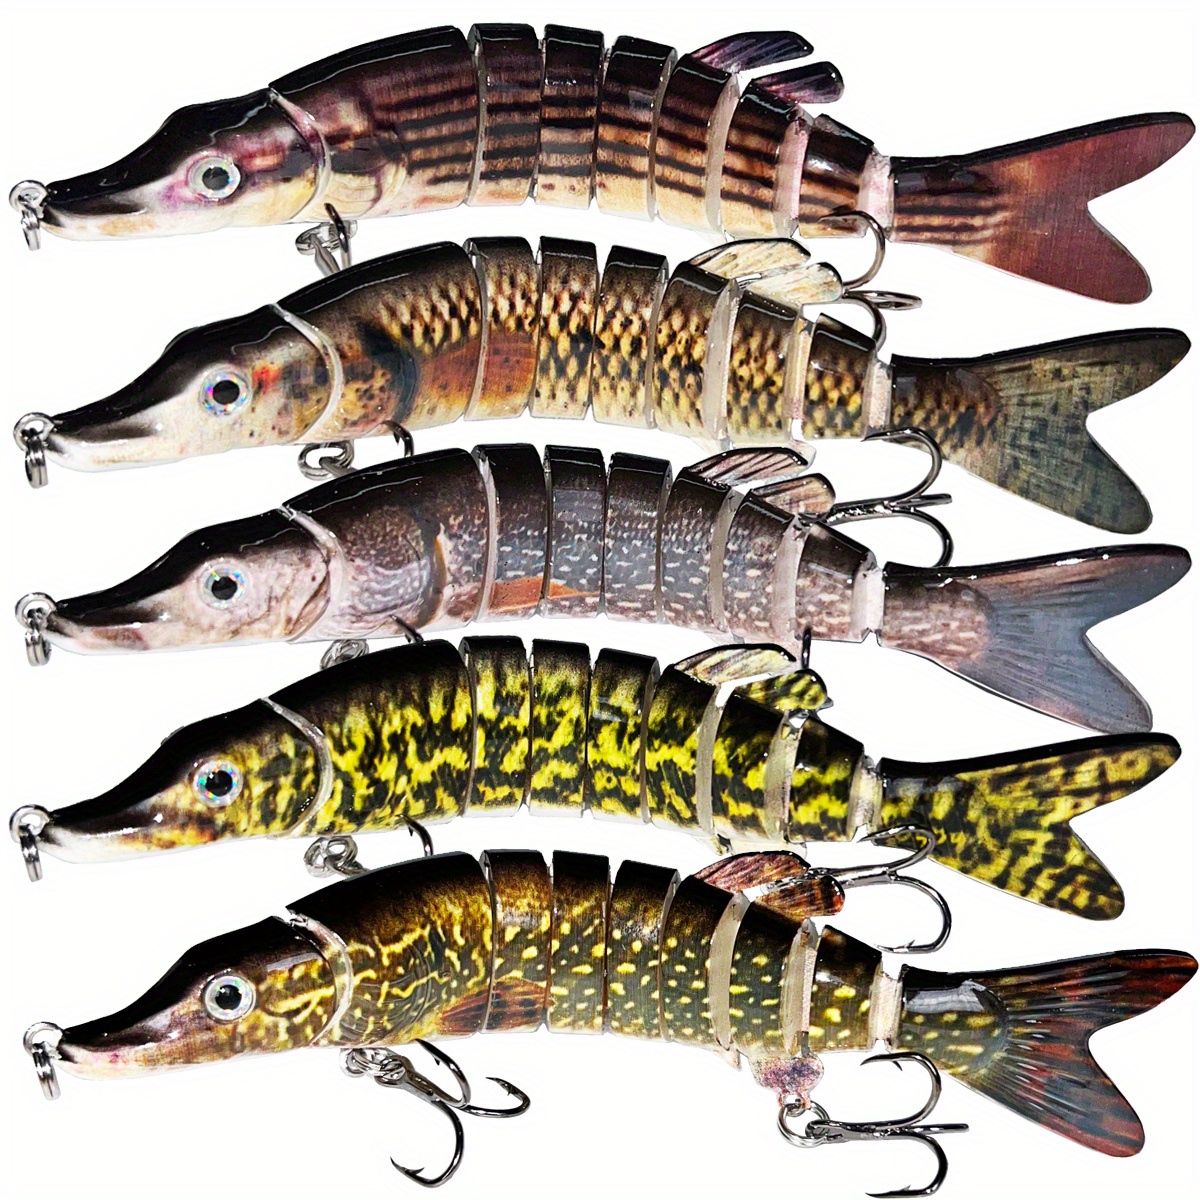 Northern-Pike-Lures-Multi-Jointed-Swimbaits-Fishing-Lure 5 8 inch for  Musky Lake Trout Fishing Tackle (2PC Pike)